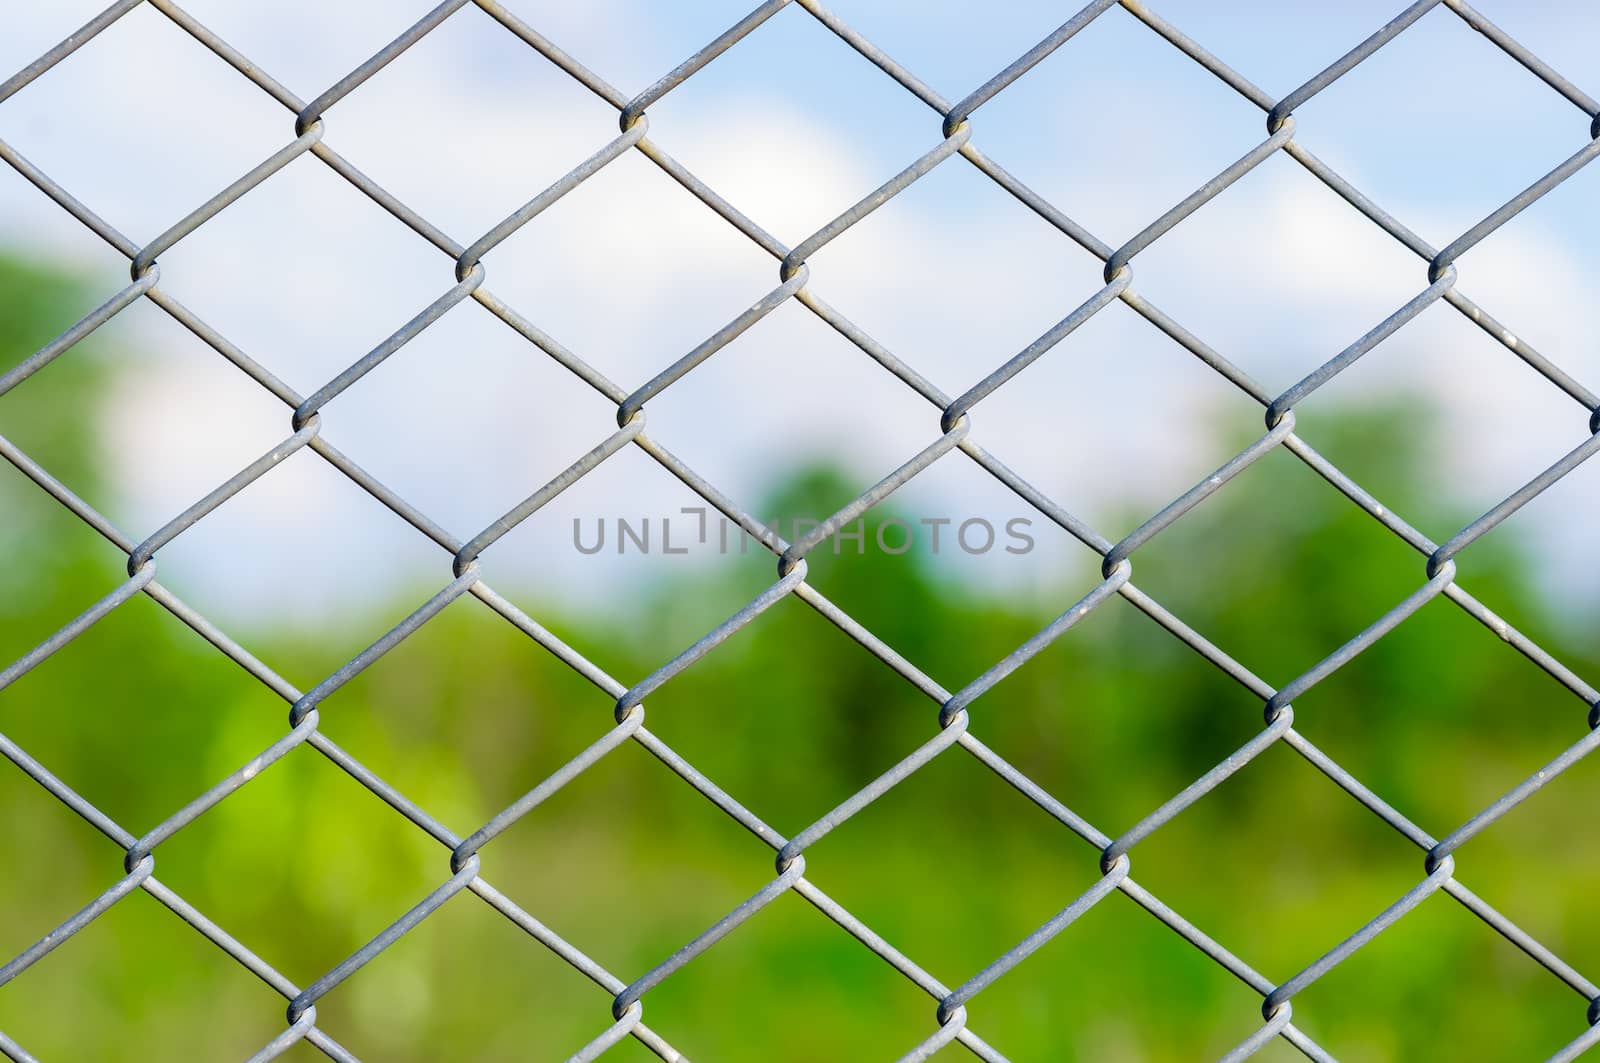 Metal mesh wire fence with blur green background